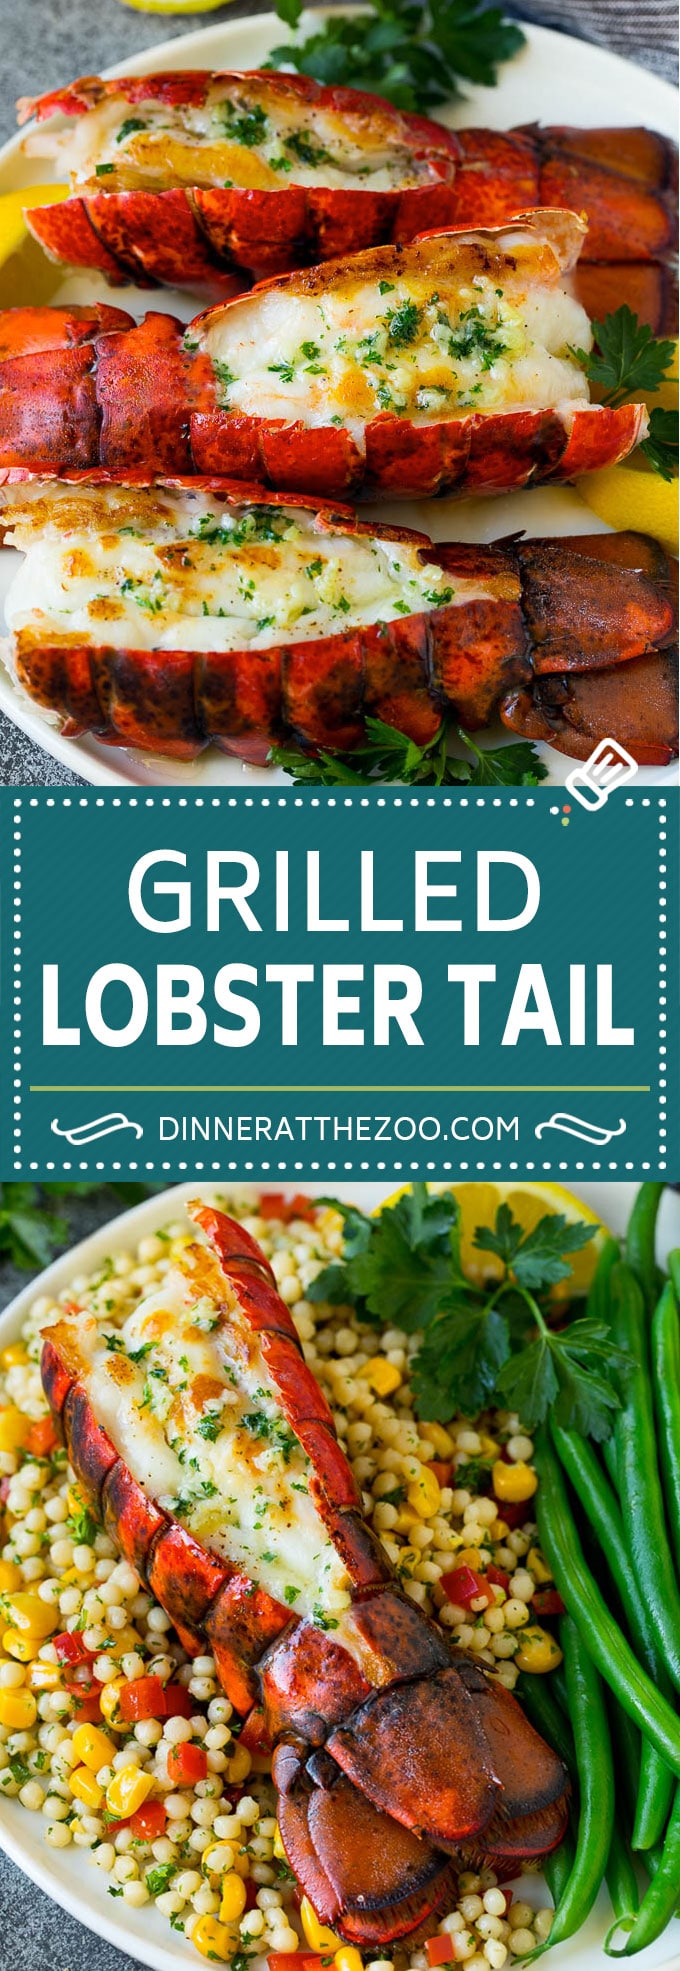 Grilled lobster tail drizzled with garlic butter is an easy and elegant dinner option. #lobster #dinneratthezoo